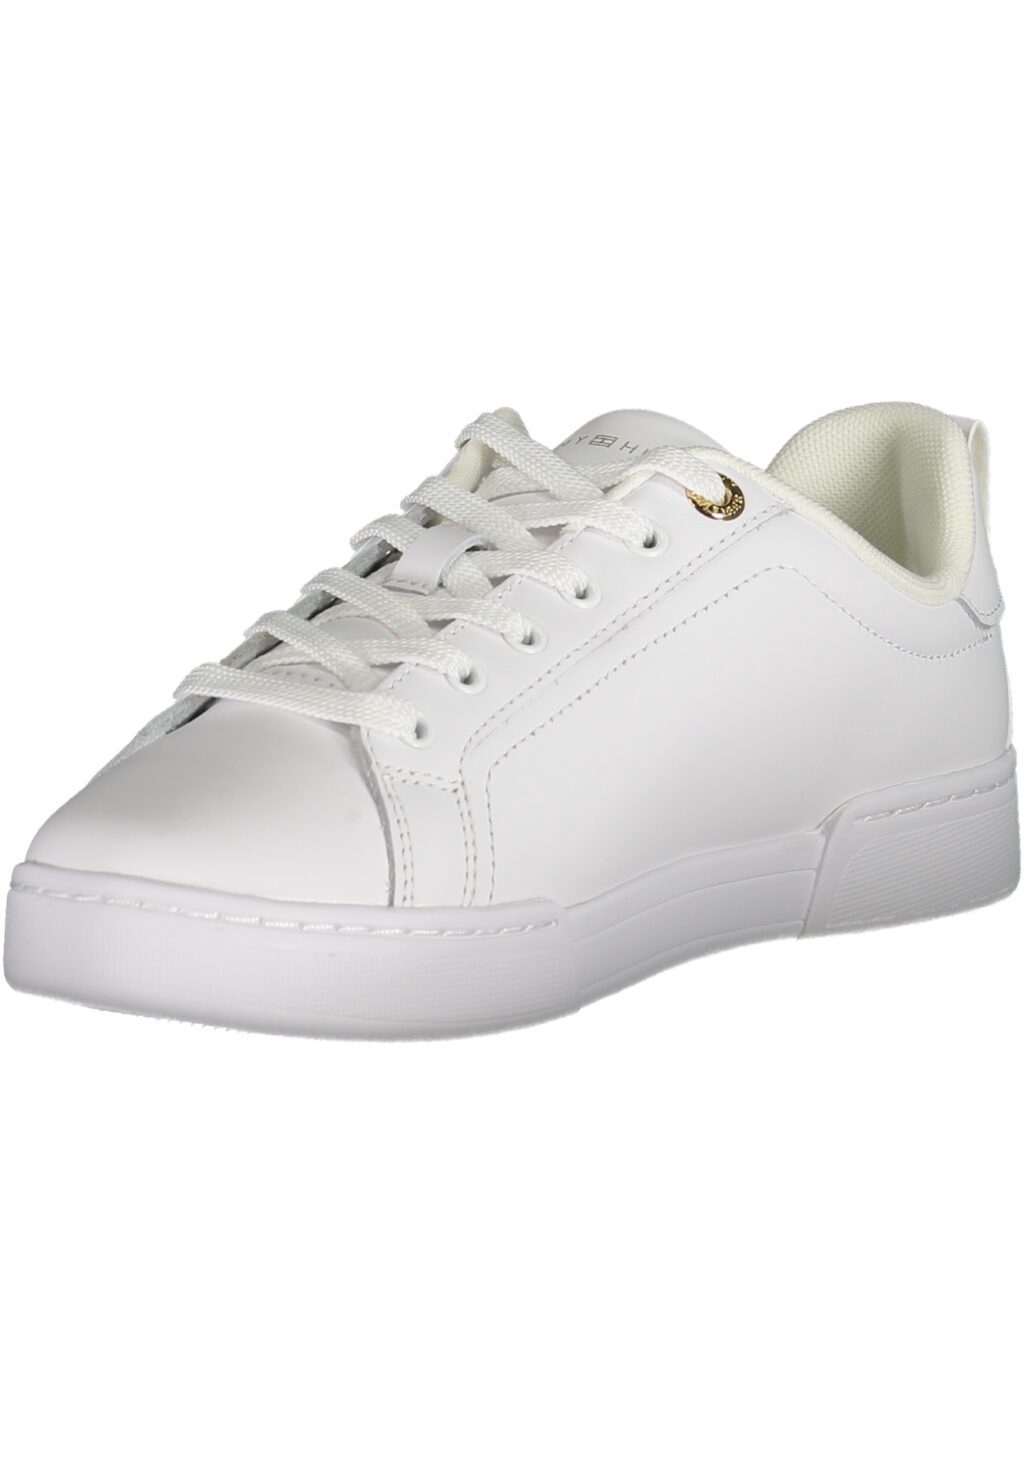 TOMMY HILFIGER WHITE WOMEN'S SPORTS SHOES FW0FW07634F_BIYBS